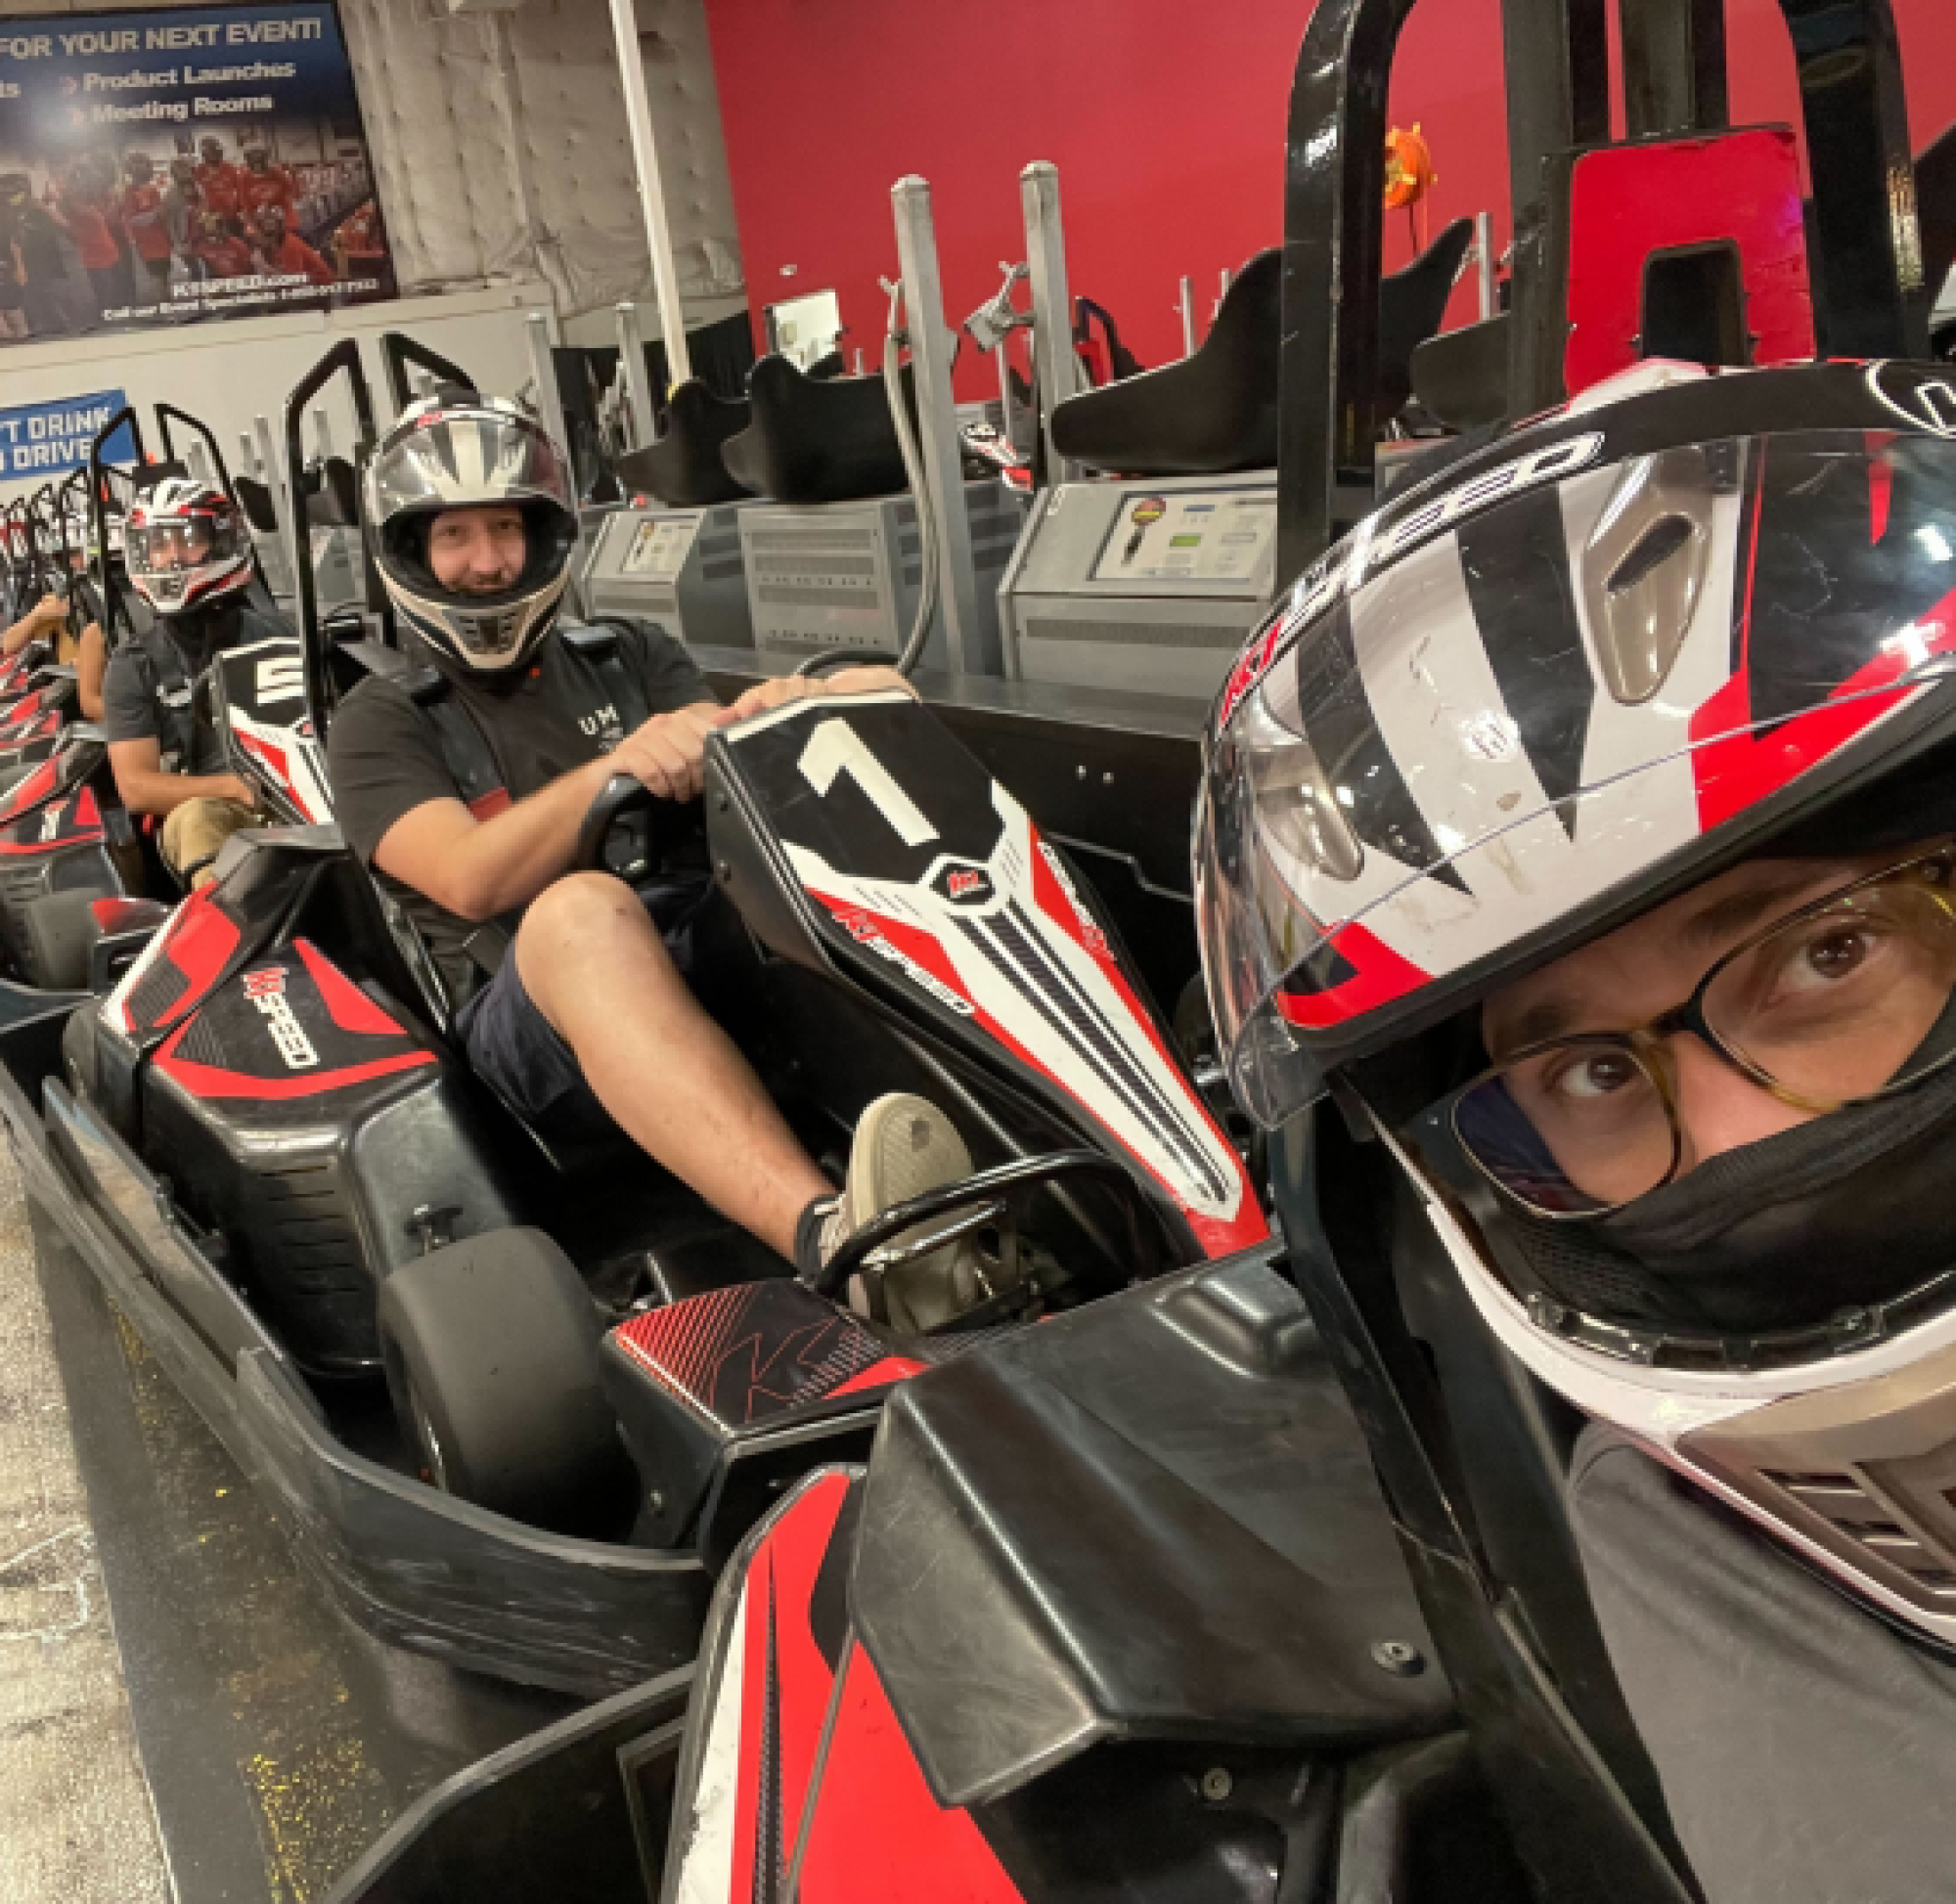 By the Pixel team members line up to race in red and black go-karts